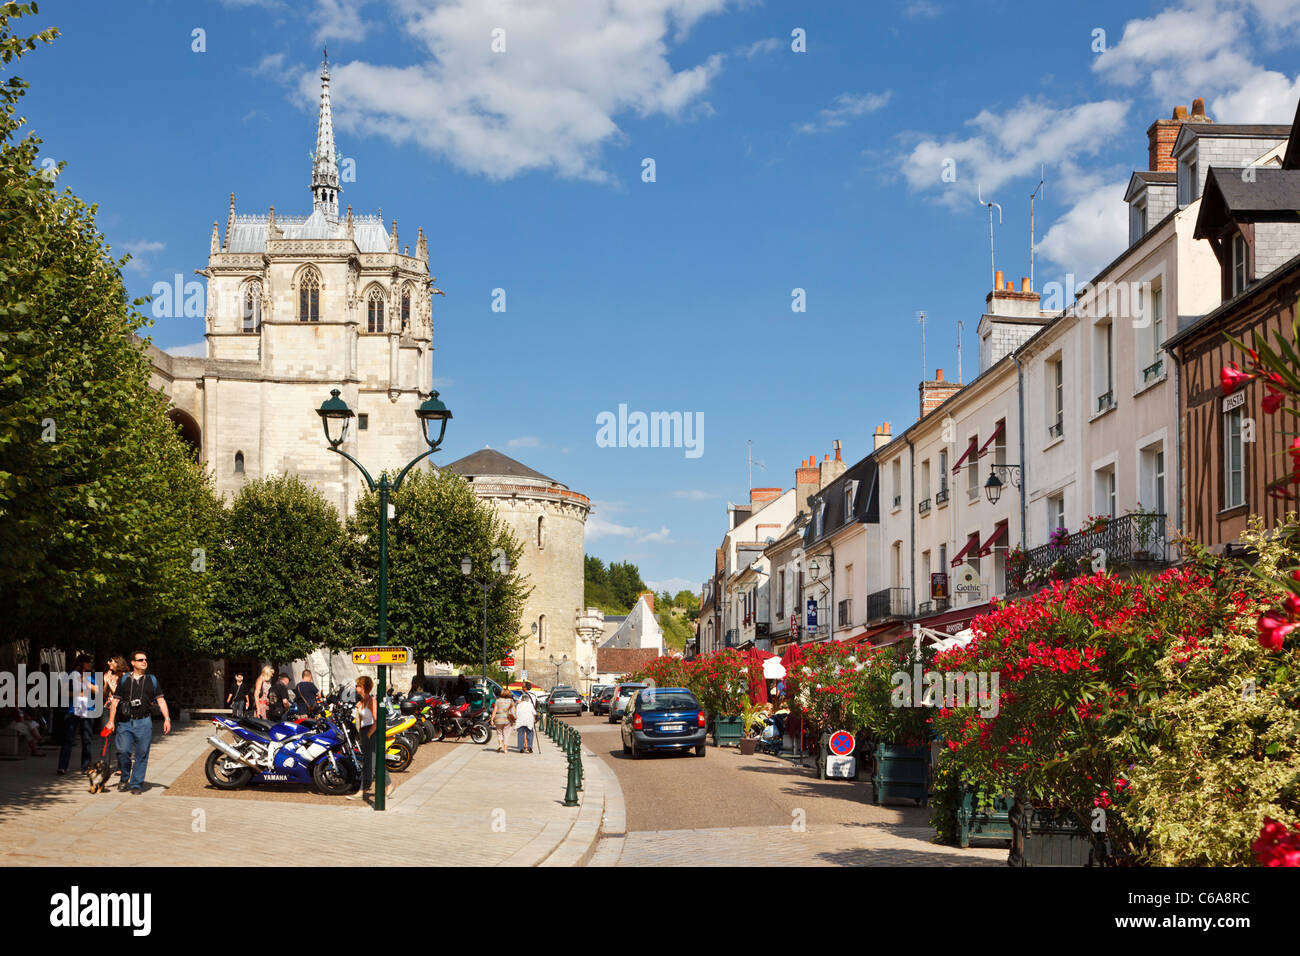 Amboise, Loire Valley, street scene with chateau, Amboise, Indre et Loire, France, Europe in summer Stock Photo